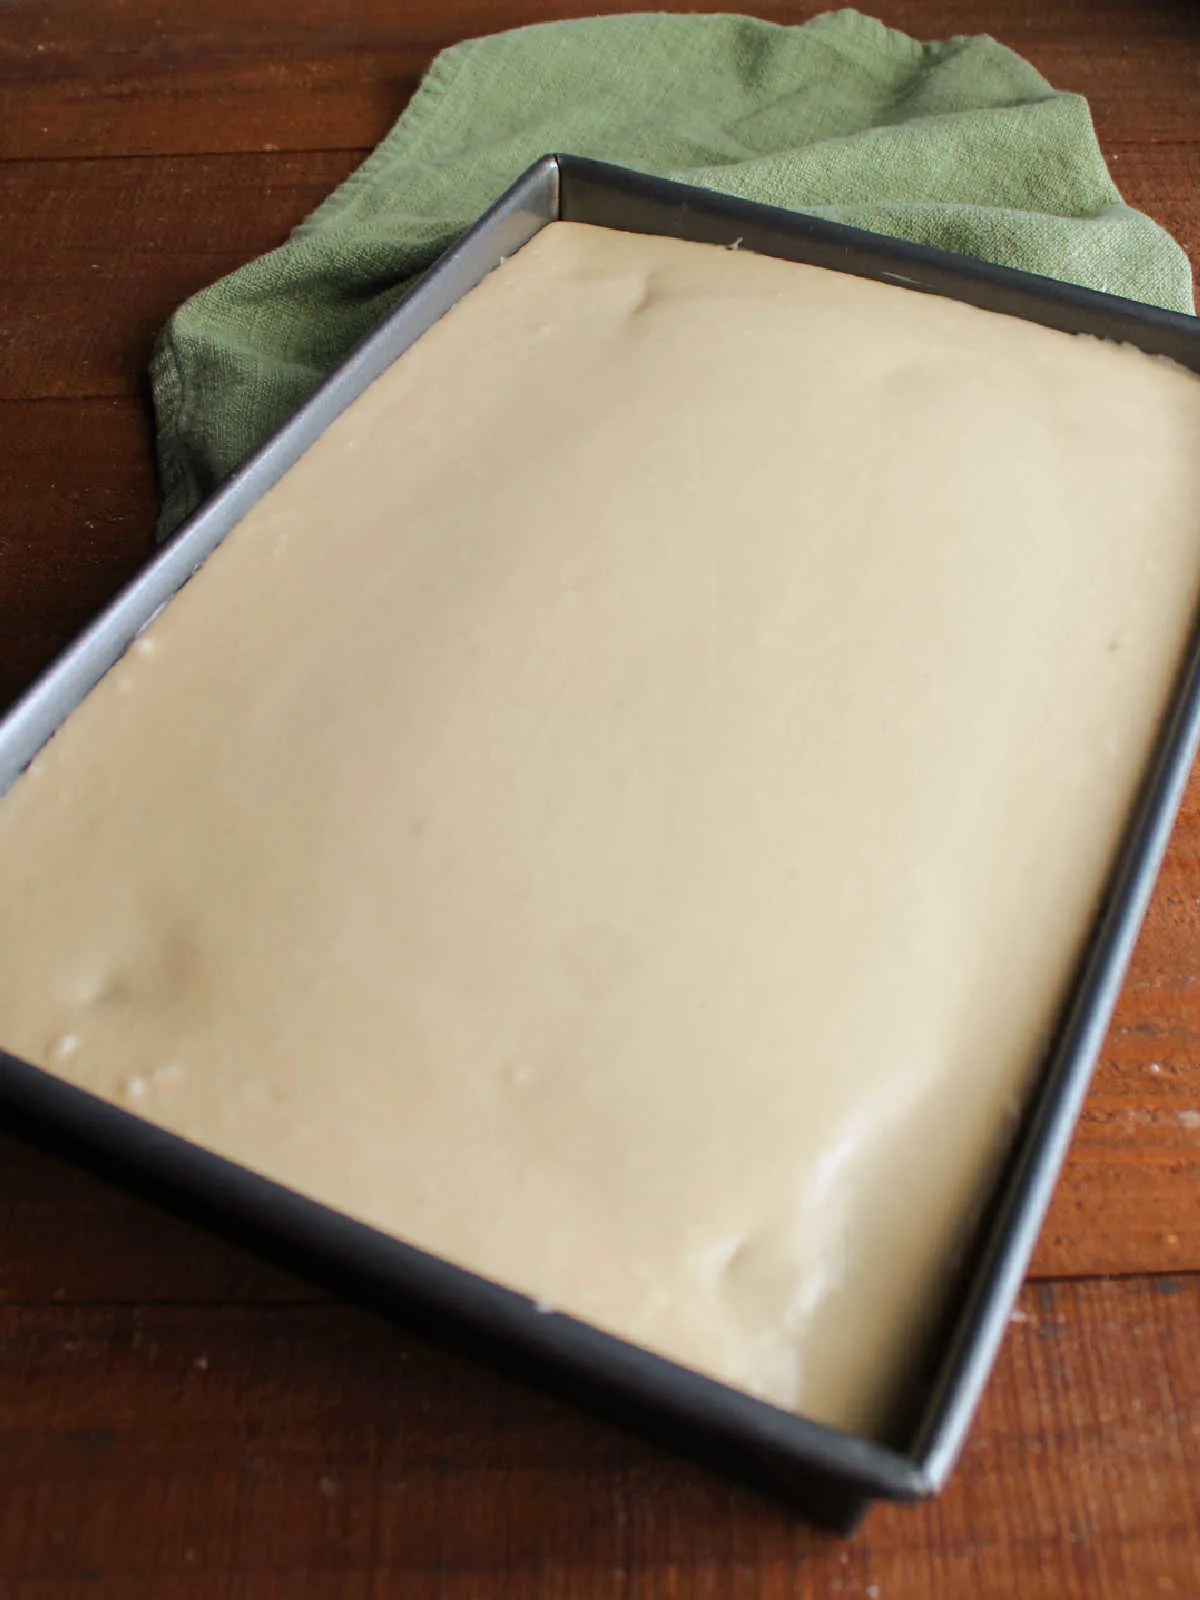 Smooth butterscotch icing spread over cake in 9x13-inch pan.